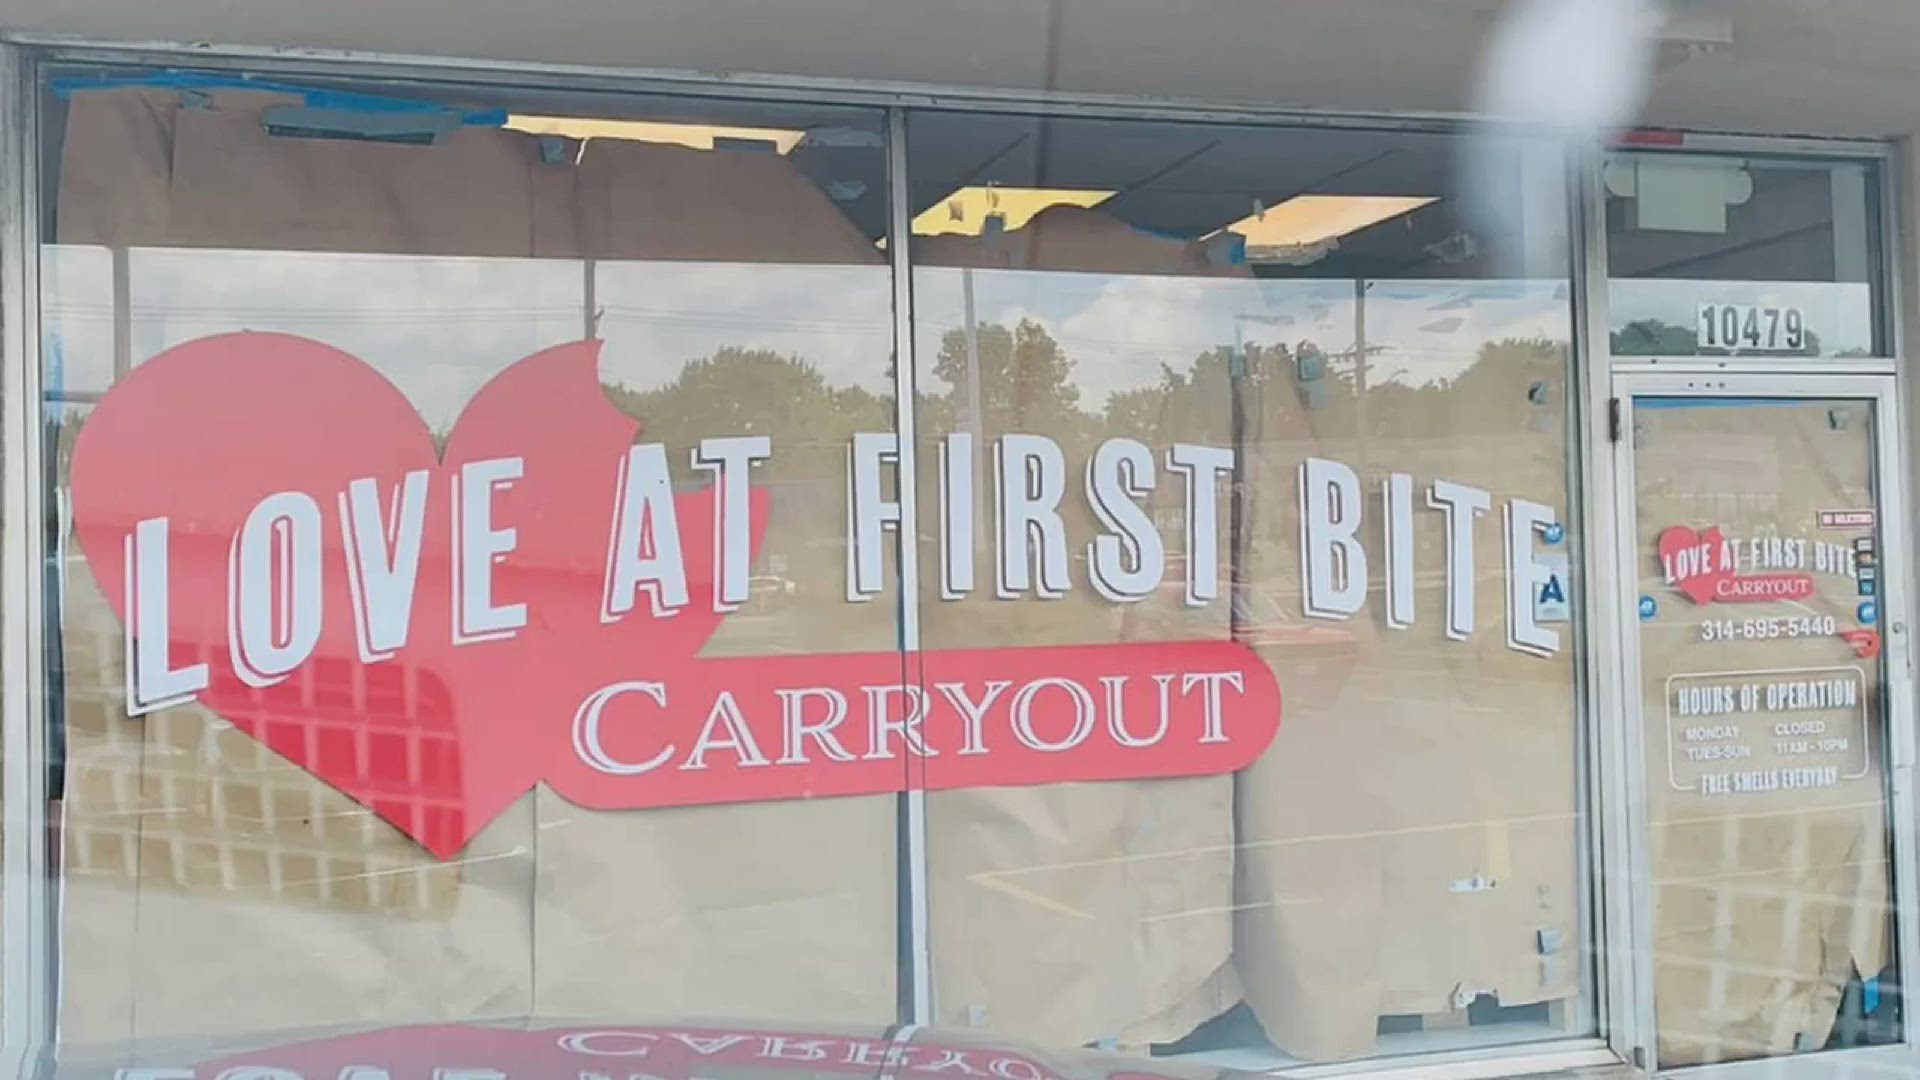 Love At First Bite's grand opening is Aug. 18